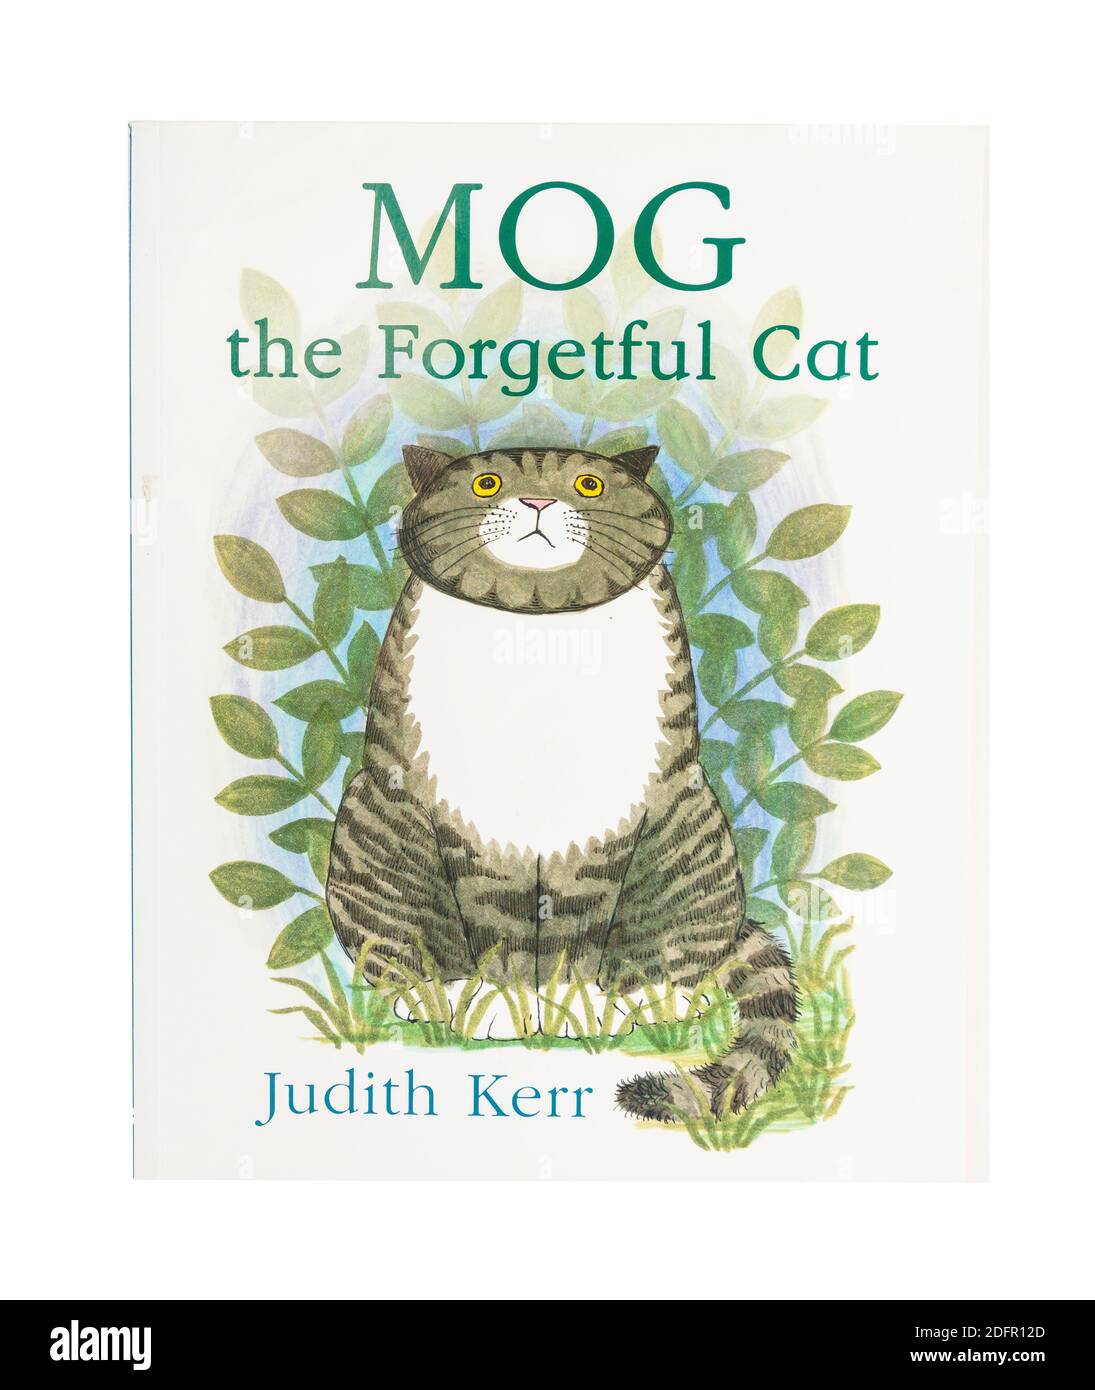 Mog the Forgetful Cat picture book by Judith Kerr, Greater London, England, United Kingdom Stock Photo